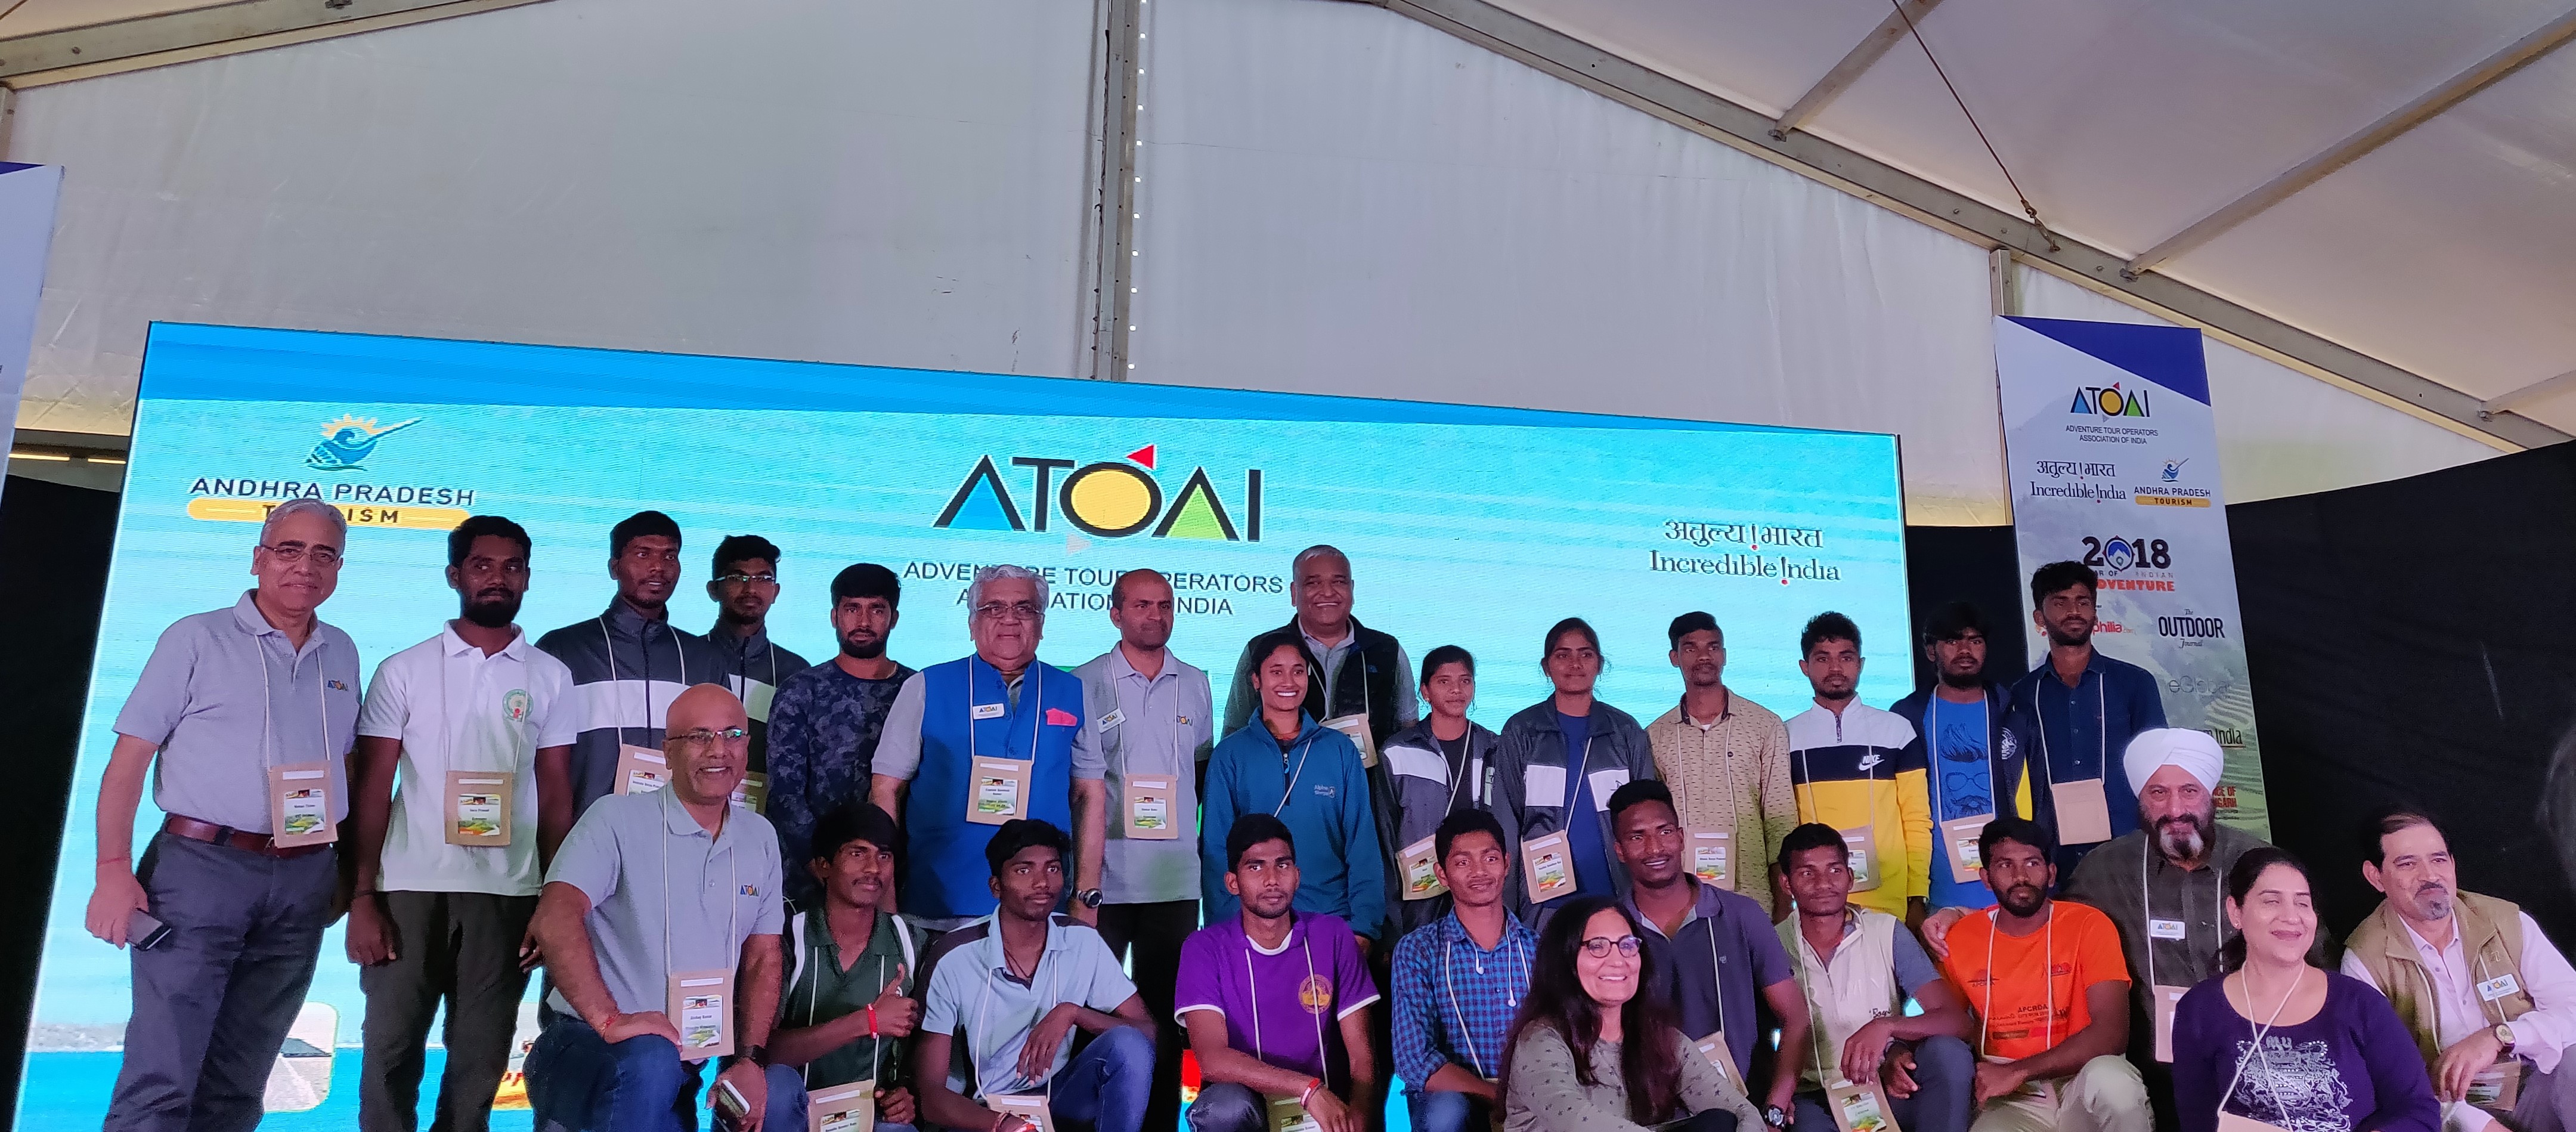 Delegates at the 14th ATOAI Convention with the twenty Everest Summiteers from Andhra Pradesh.